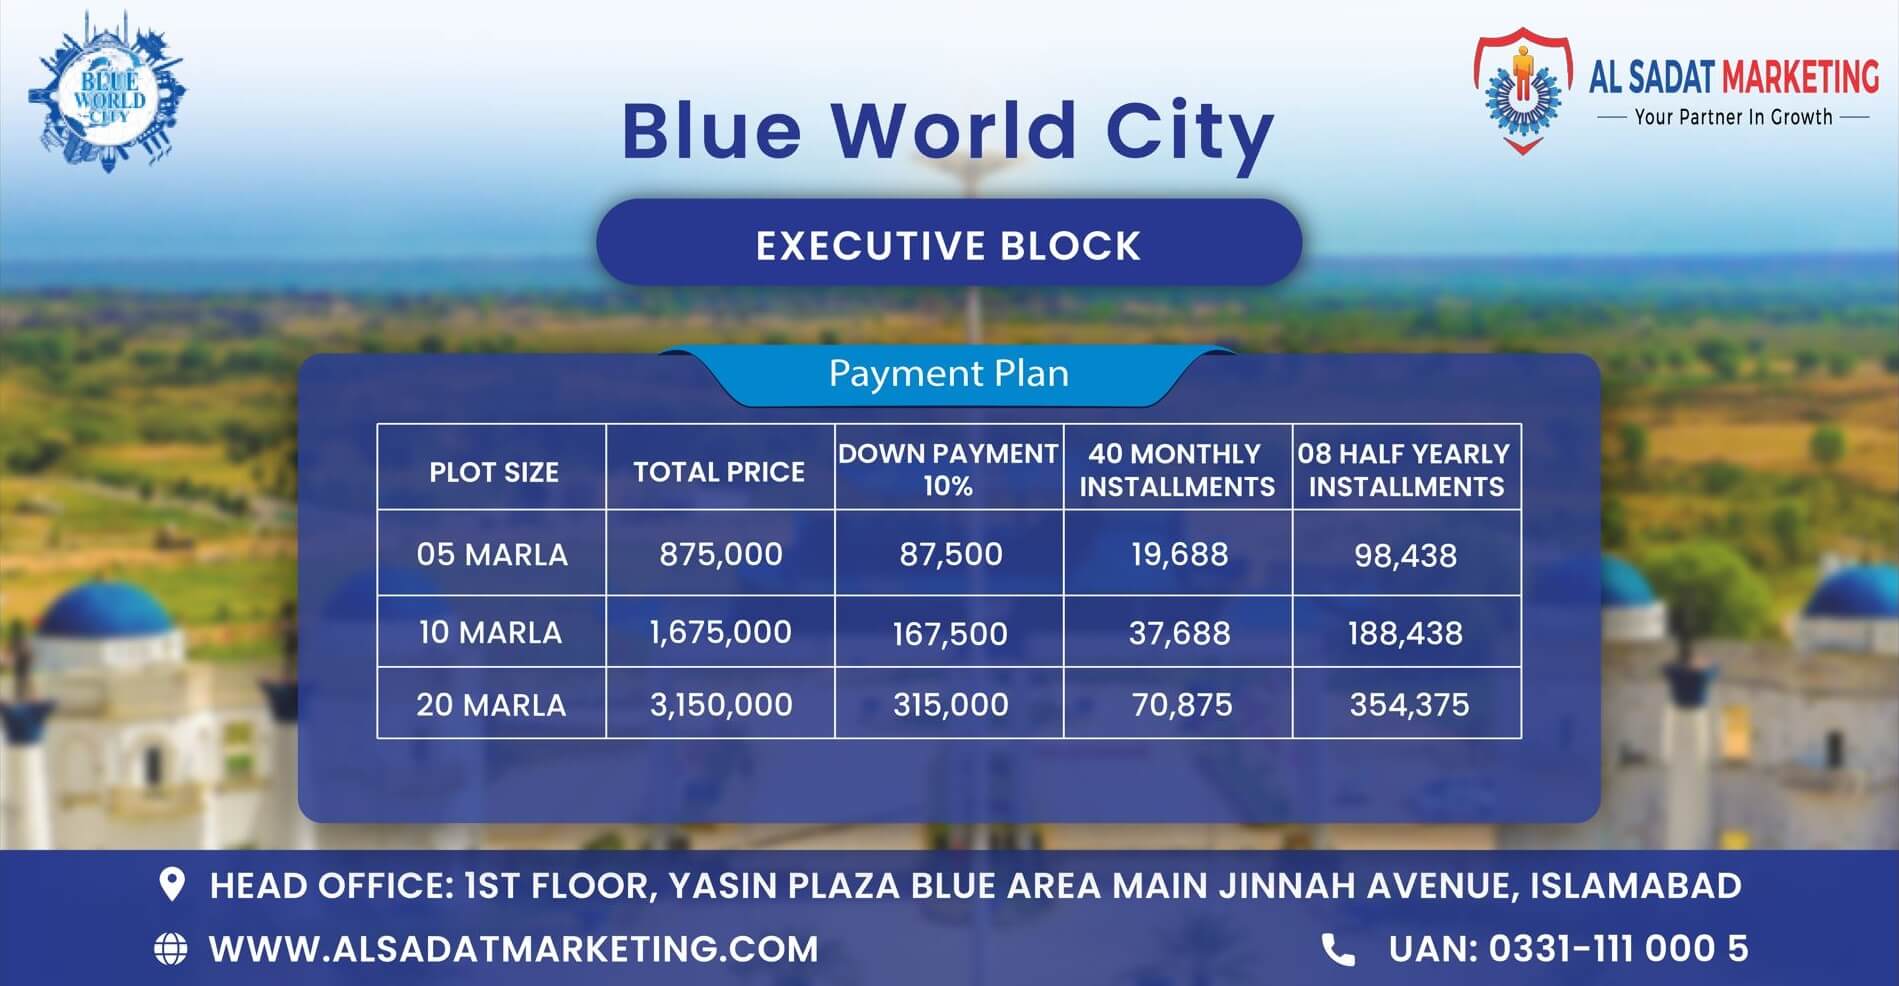 blue world city executive block residential plots payment plan – blue world city islamabad executive block residential plots payment plan – blue world city rawalpindi executive block residential plots payment plan – blue world city executive block payment plan – blue world city islamabad executive block payment plan – blue world city rawalpindi executive block payment plan – blue world city payment plan – blue world city islamabad payment plan - blue world city rawalpindi payment plan – blue world city– blue world city islamabad – blue world city rawalpindi– blue world city housing society – blue world city islamabad housing society – blue world city real estate project – blue world city islamabad real estate project - al sadat marketing - alsadat marketing - al-sadat marketing